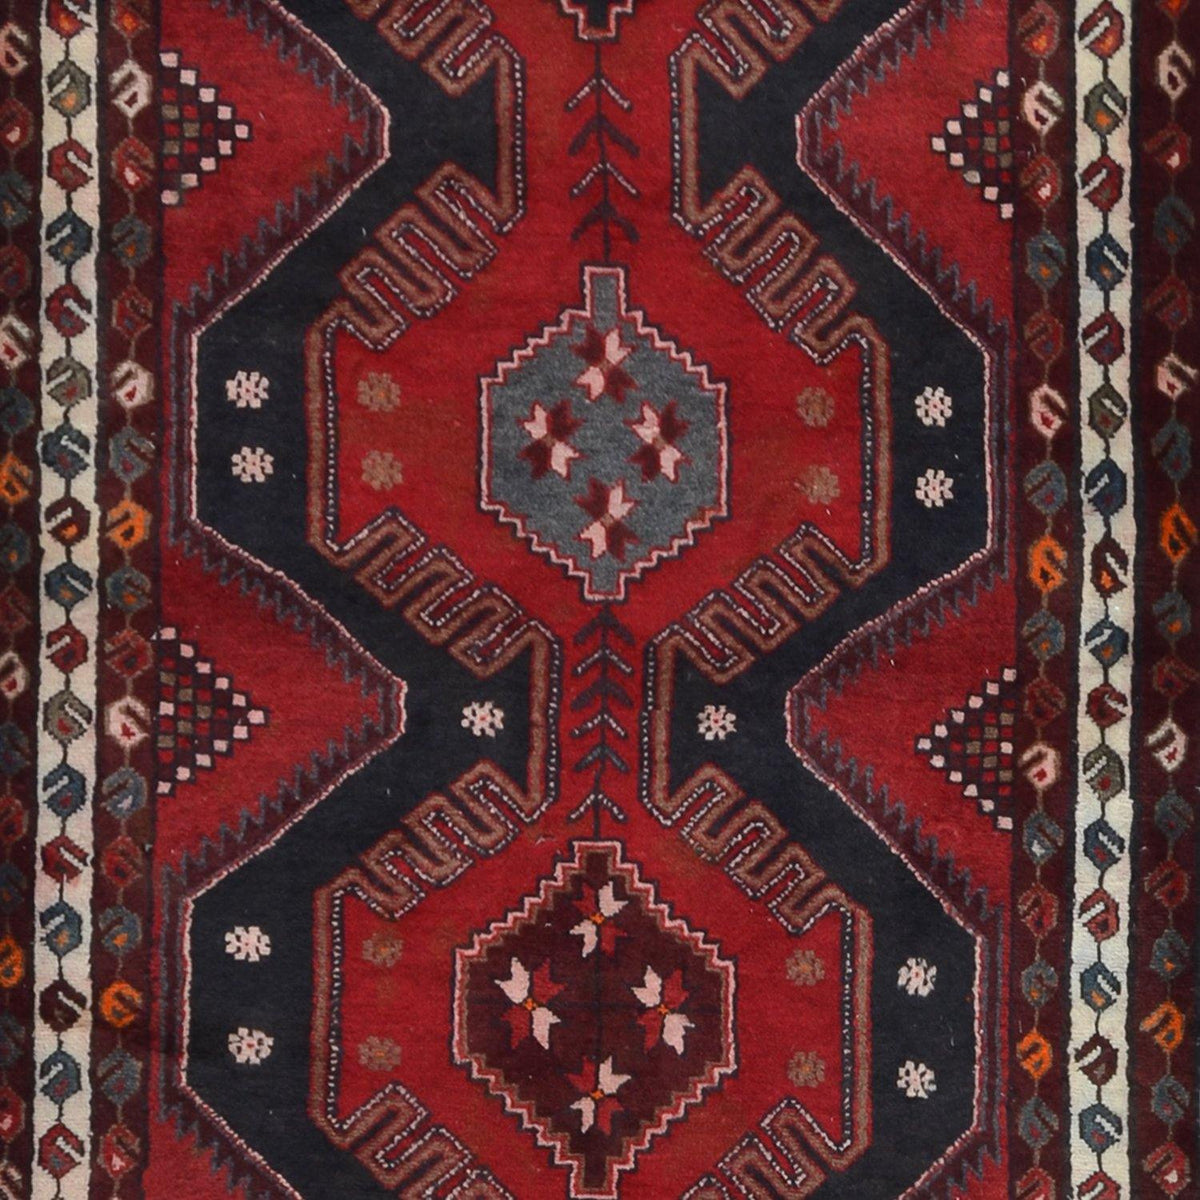 Hand-knotted Wool Sarab Persian Runner 113cm x 308cm